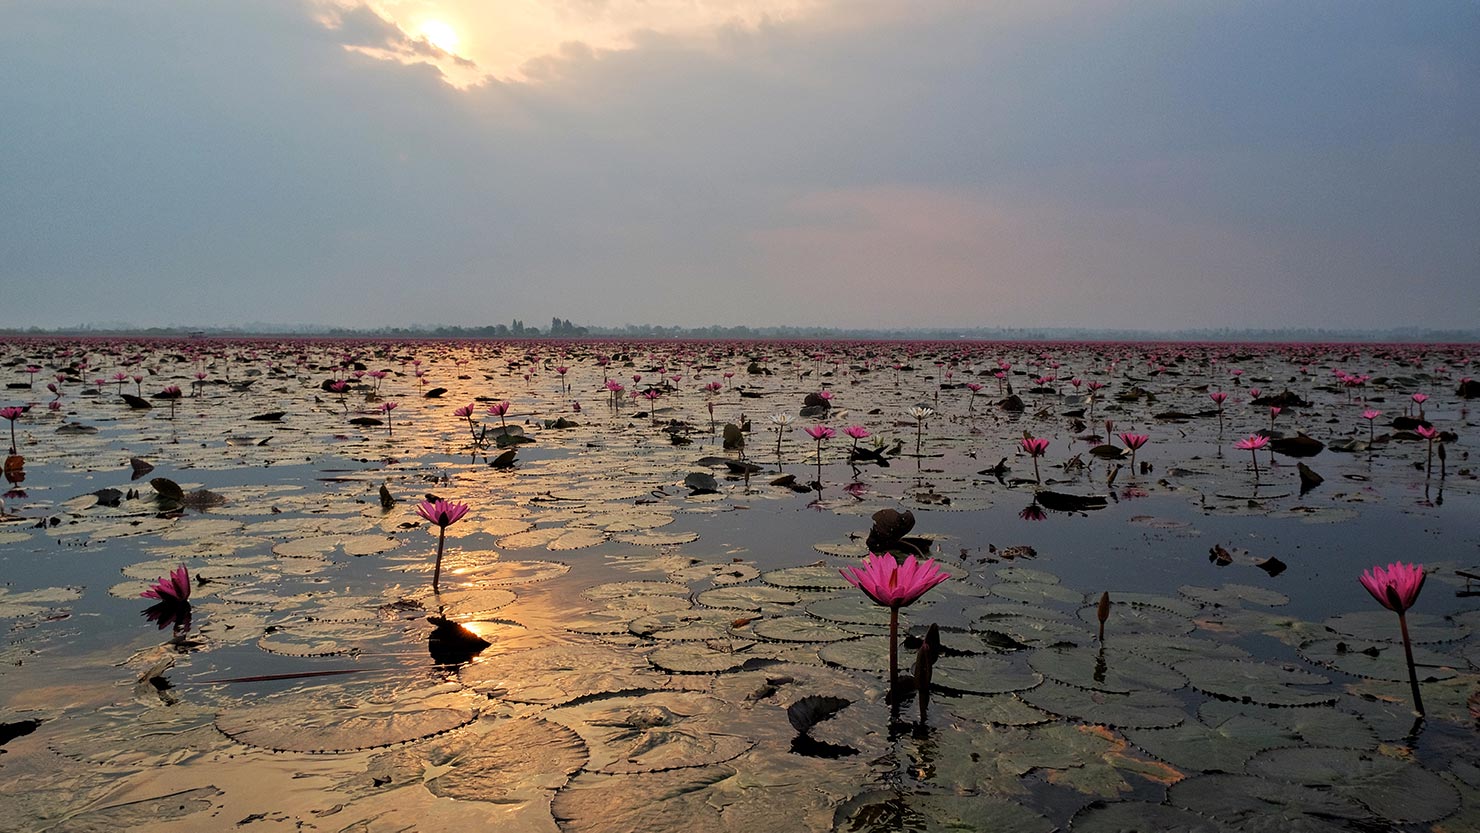 The sun emerges from a cloud bank at dawn, illuminating the lilies at Nong Han Lake in Udon Thani Thailand